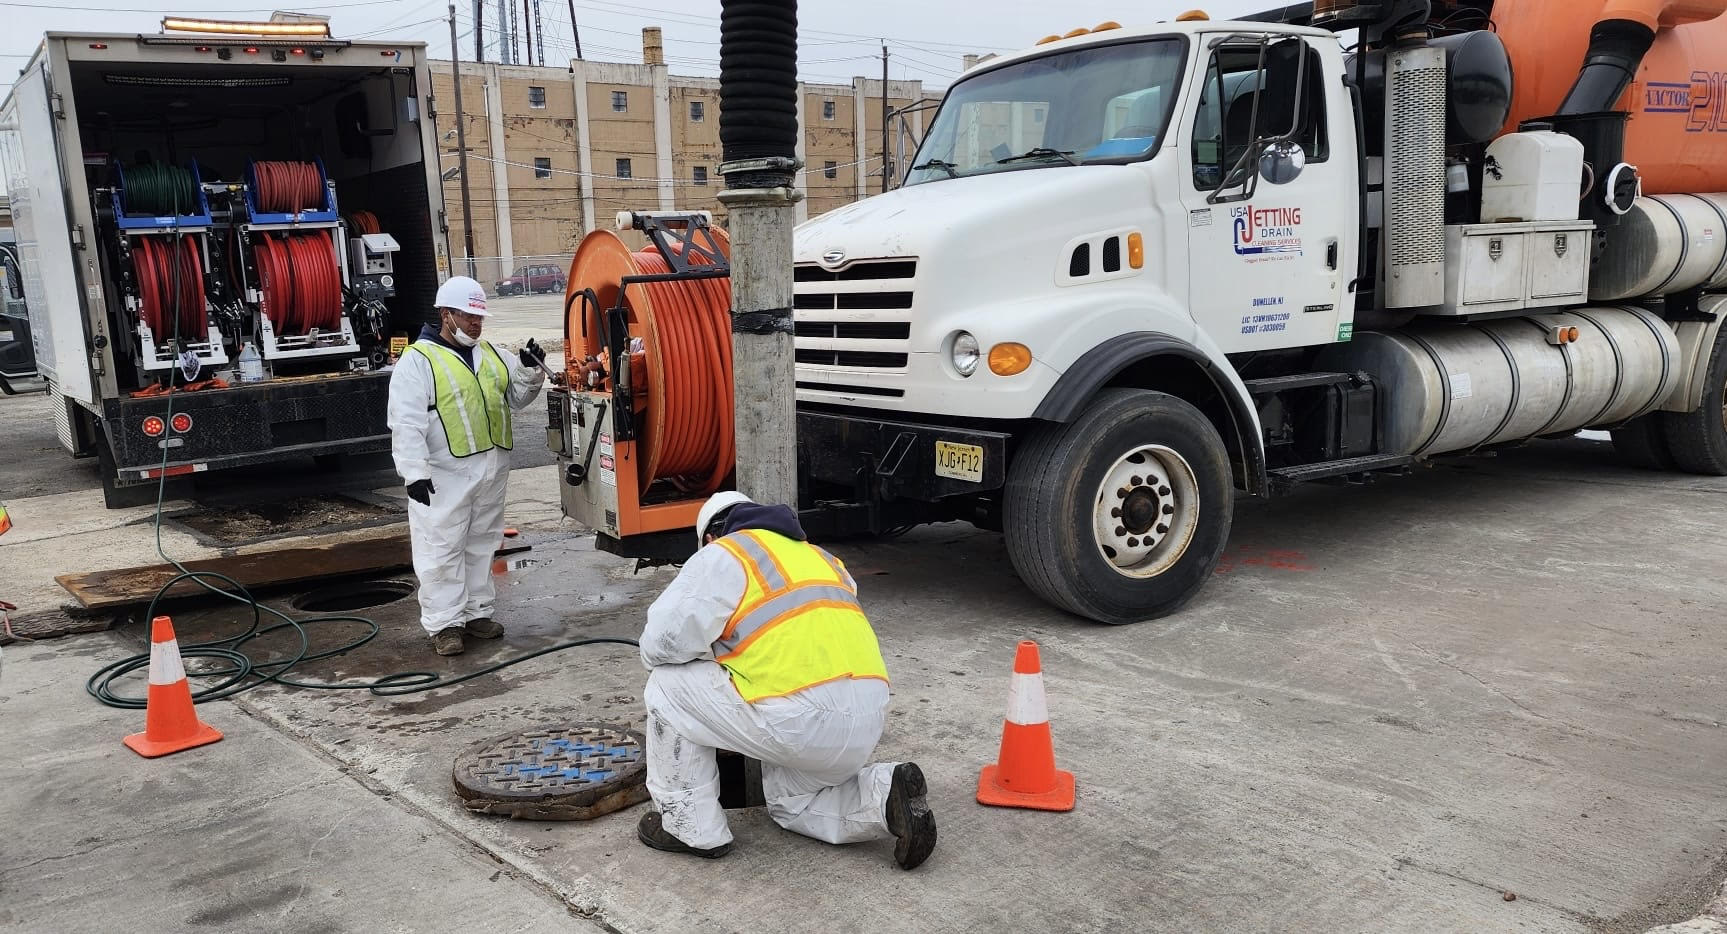 USA Jetting Drain Cleaning Services